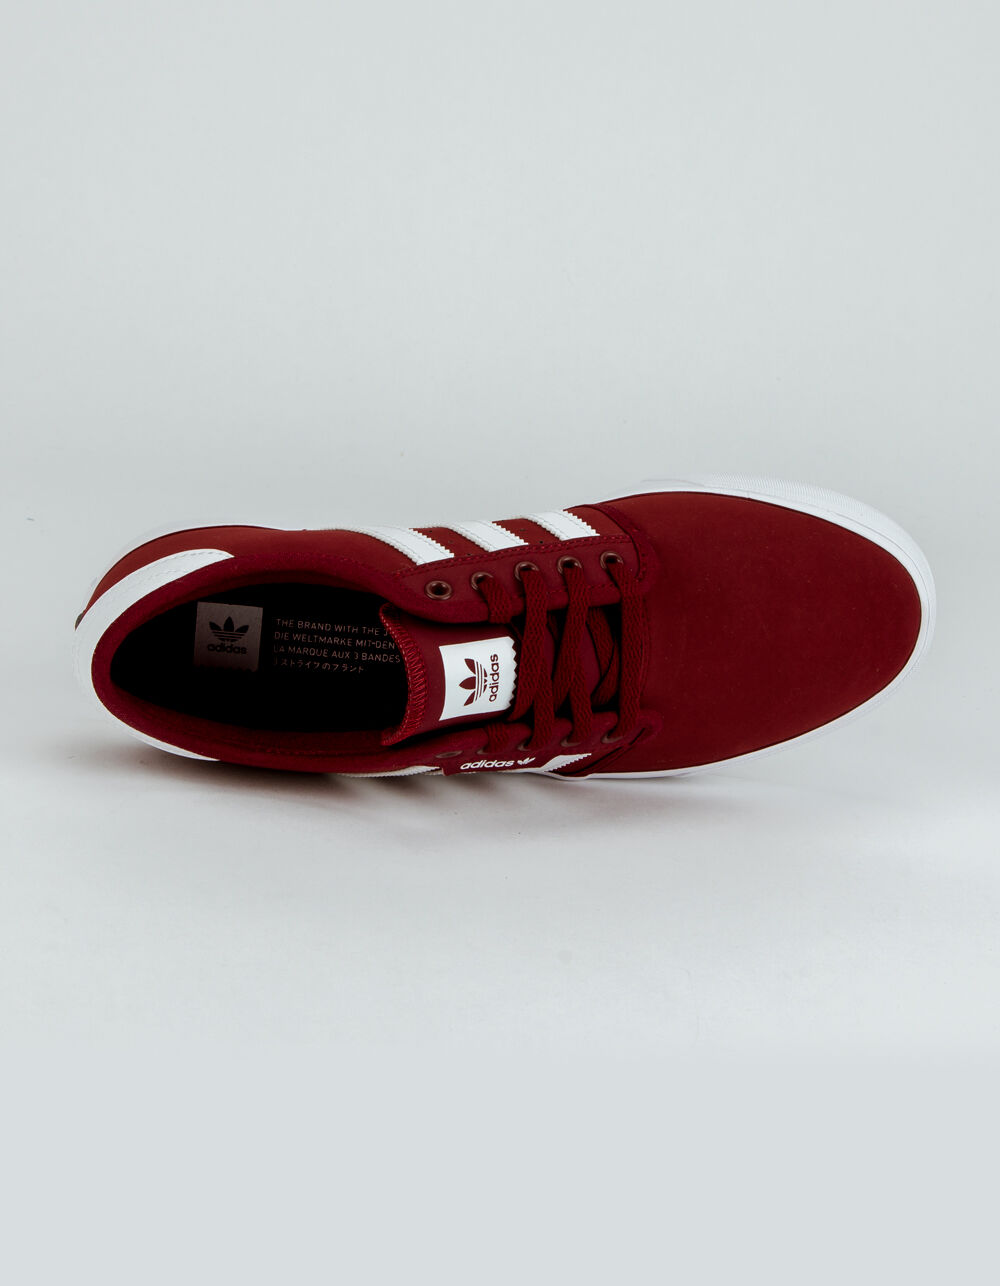 ADIDAS Seeley Collegiate Burgundy & Future White Shoes image number 2